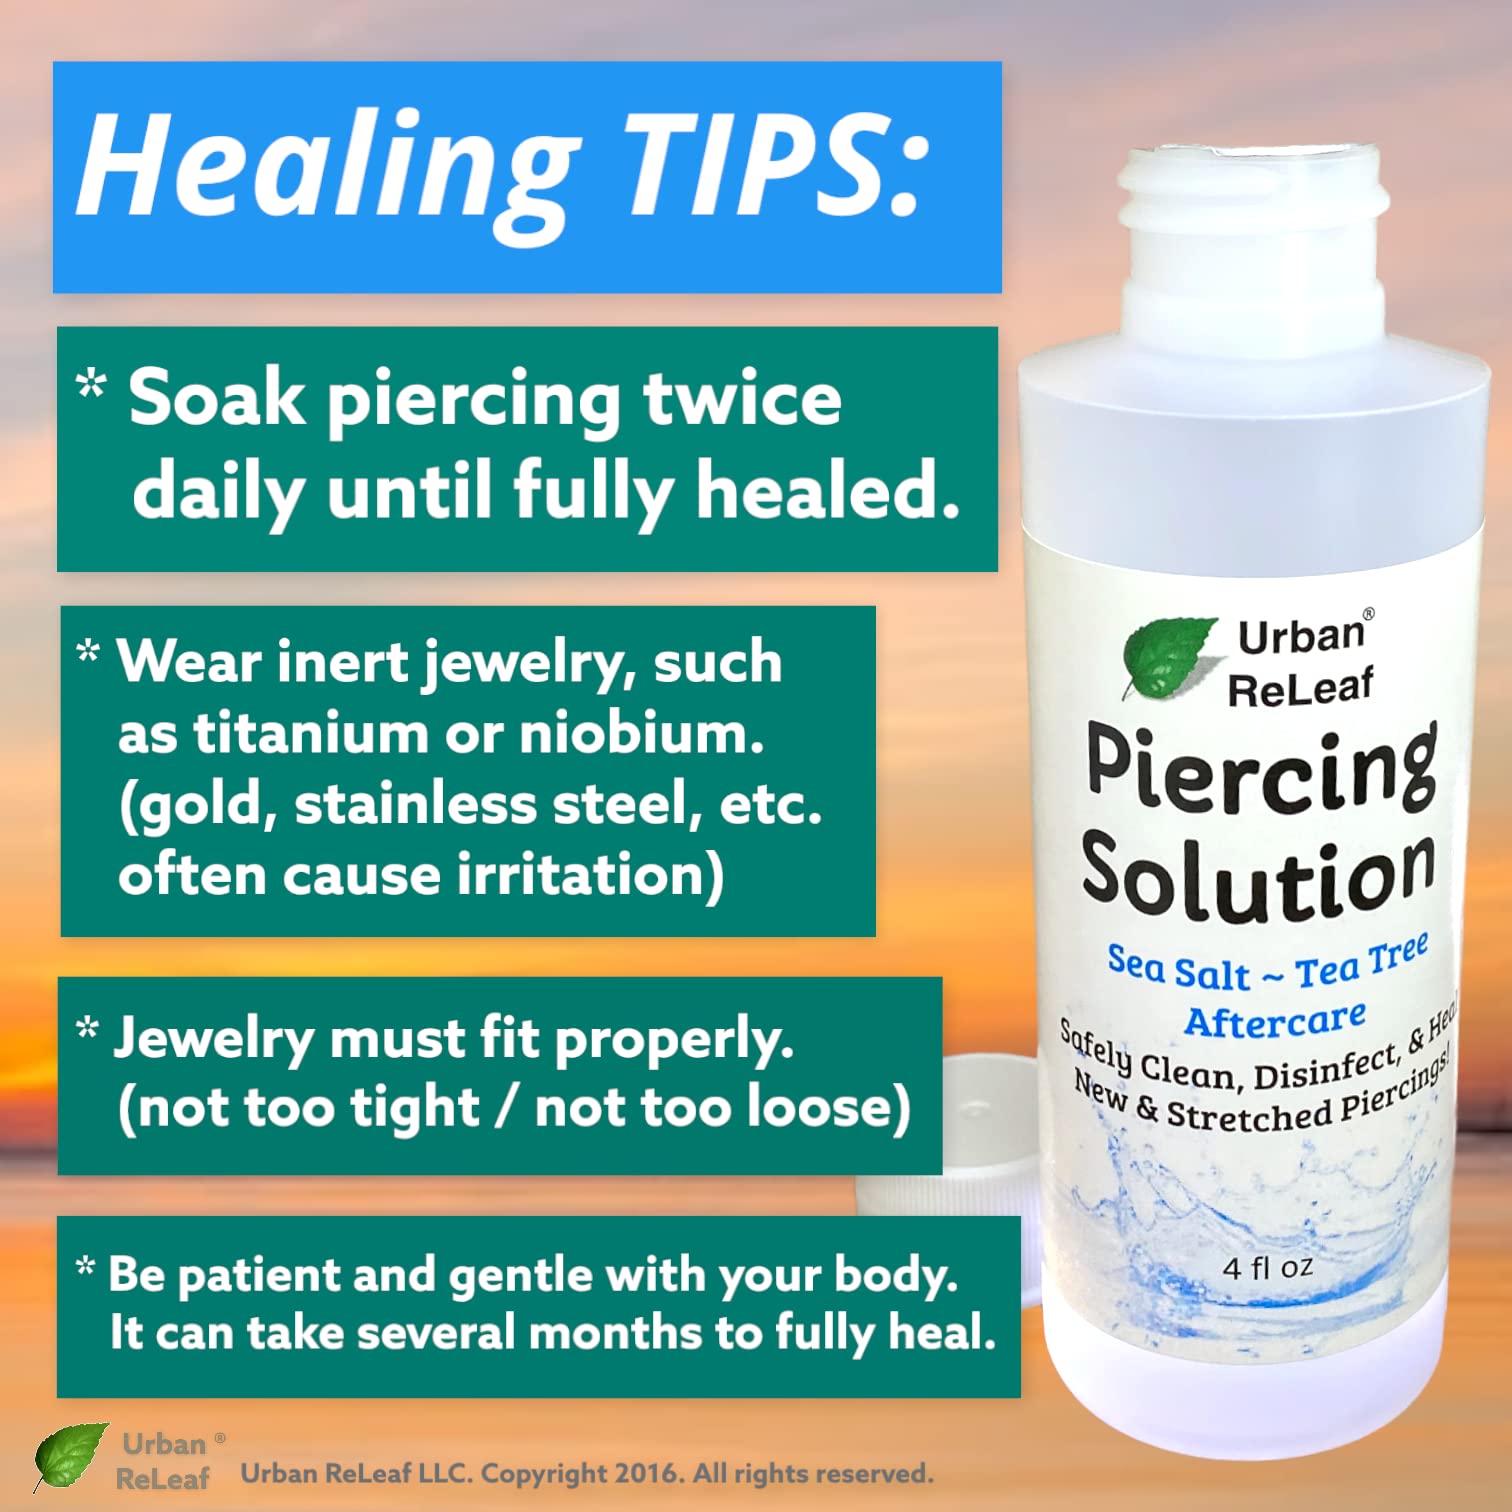 Urban ReLeaf Piercing Solution ! Healing Sea Salts & Tea Tree AFTERCARE 4 oz, Ready to use. Safely Clean, Soothe & Heal New & Stretched Piercings. Gentle Effective Natural & Soothing. Works Fast